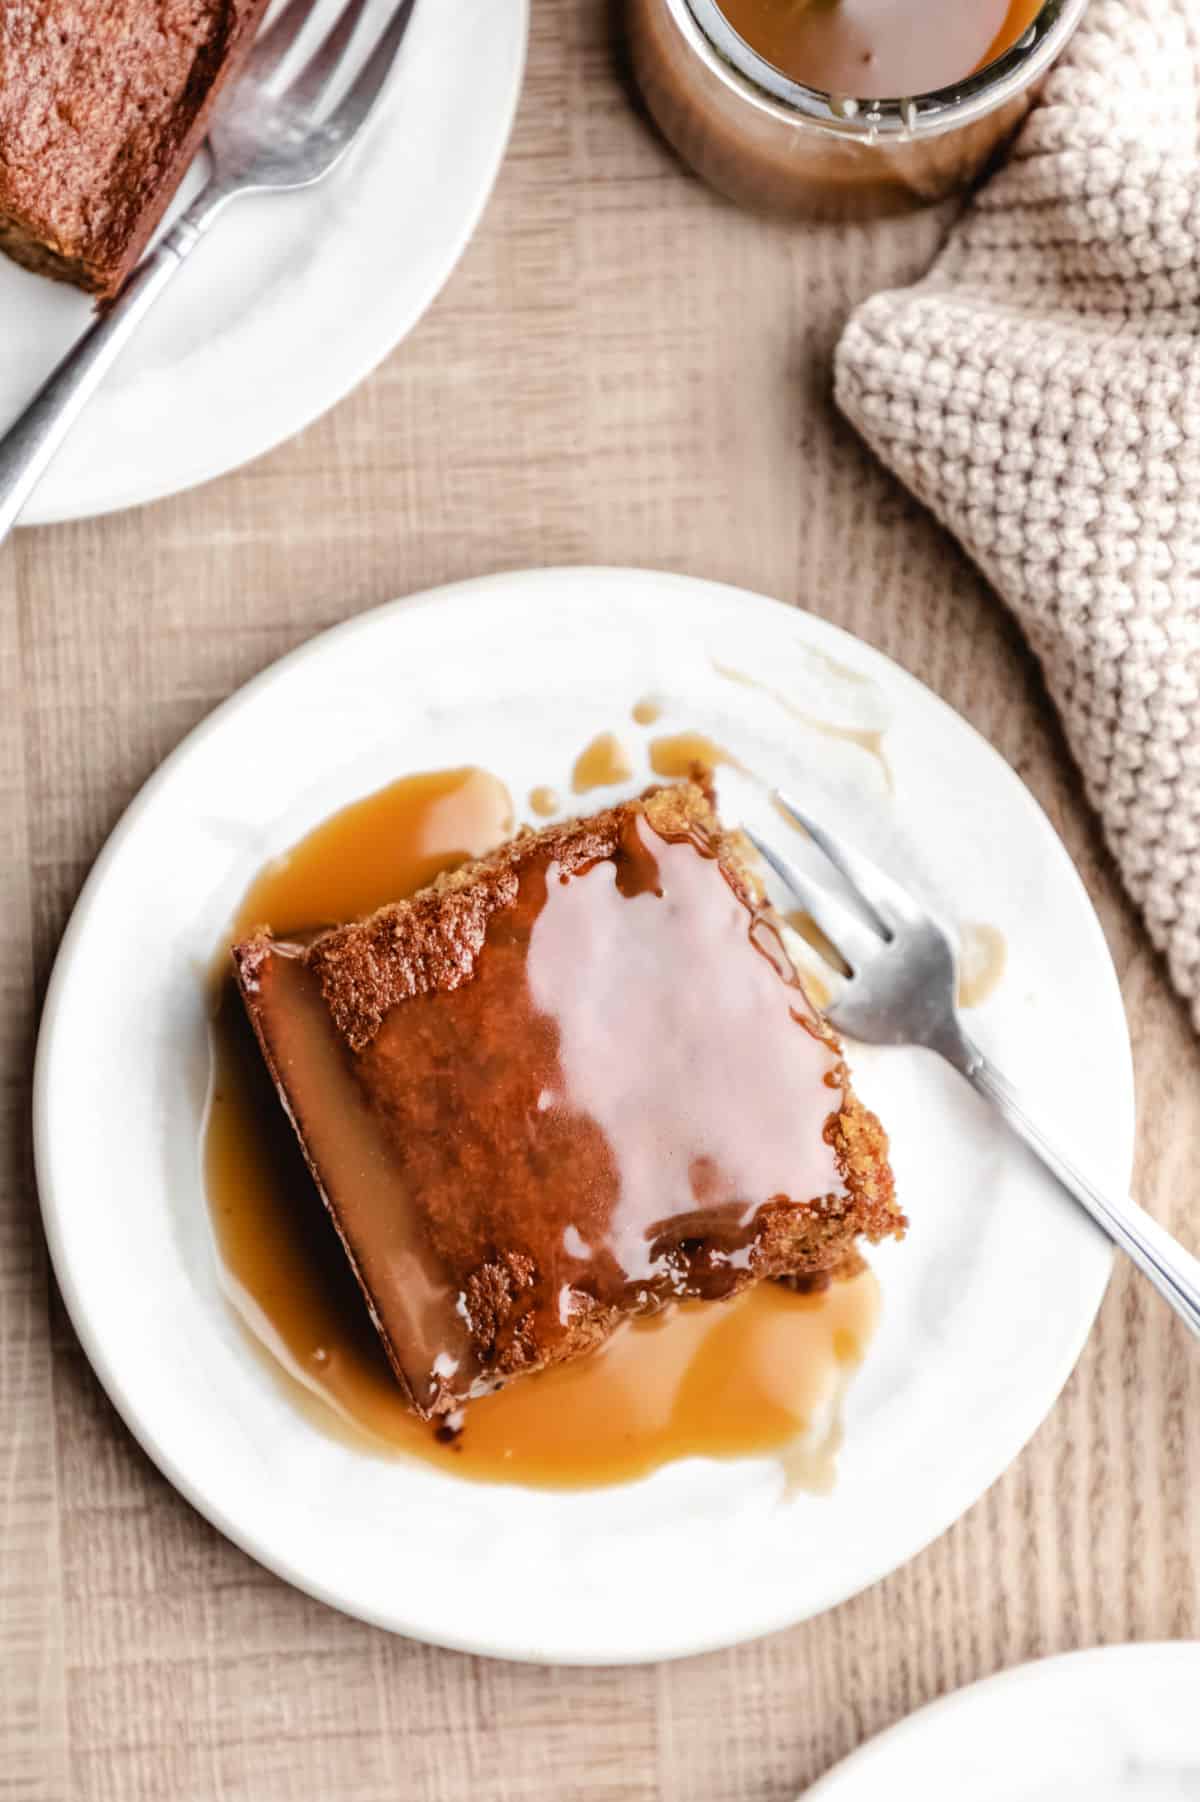 A slice of sticky toffee pudding cake topped with toffee sauce.